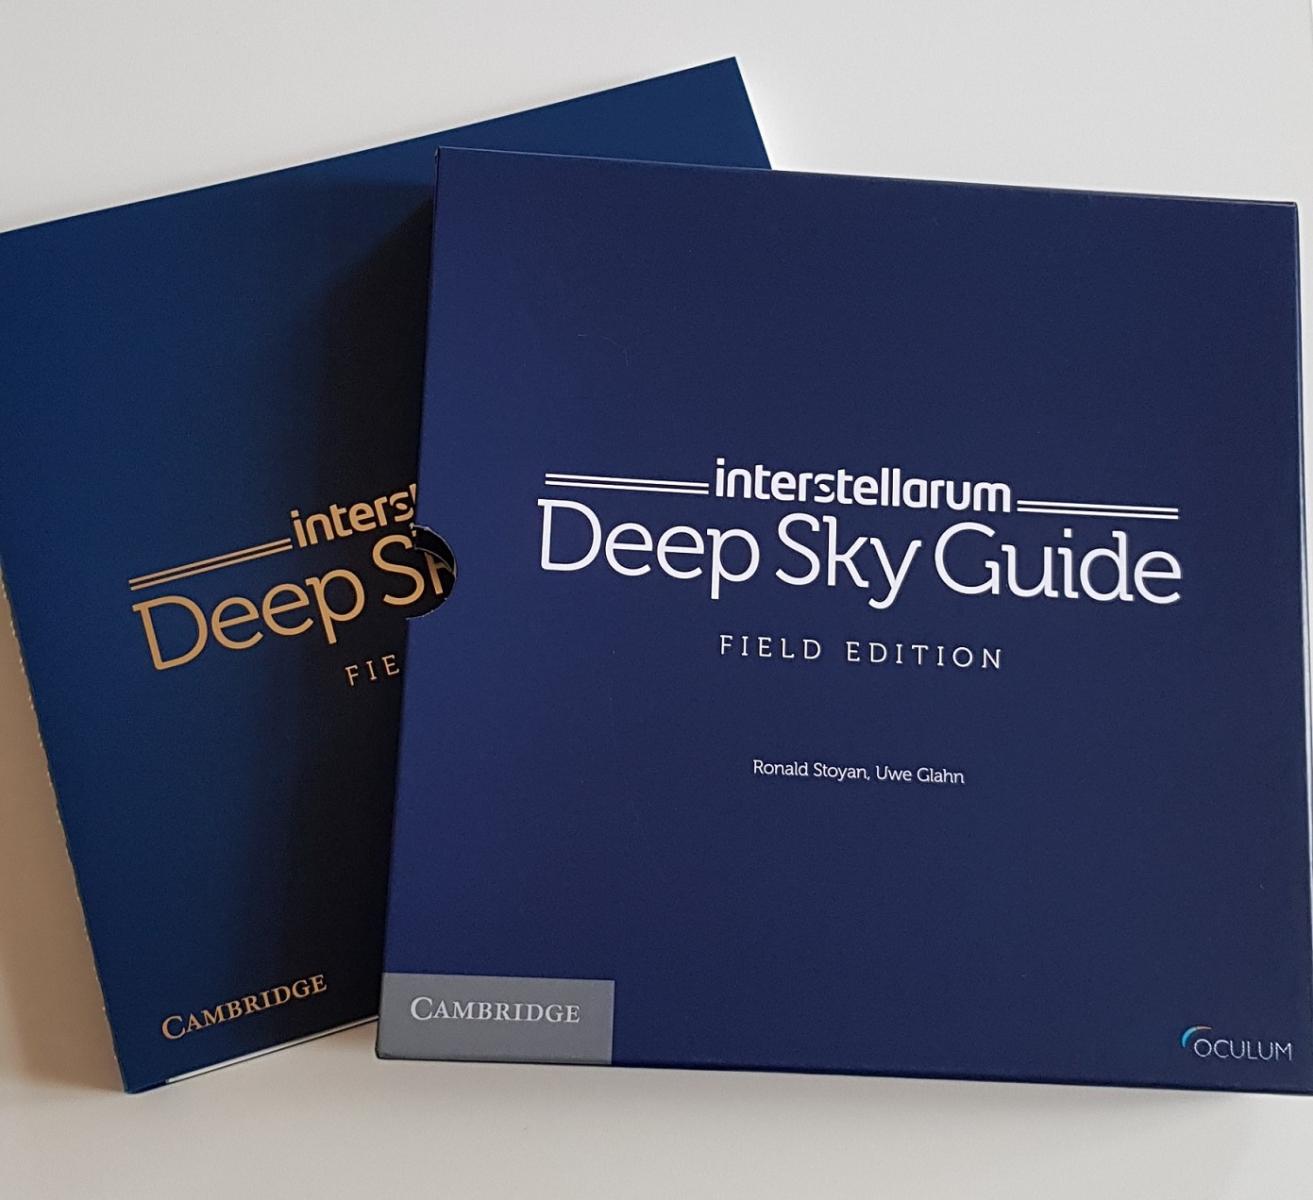 Interstellarum Deep Sky Guide Is Here Vendor And Group Announcements Cloudy Nights